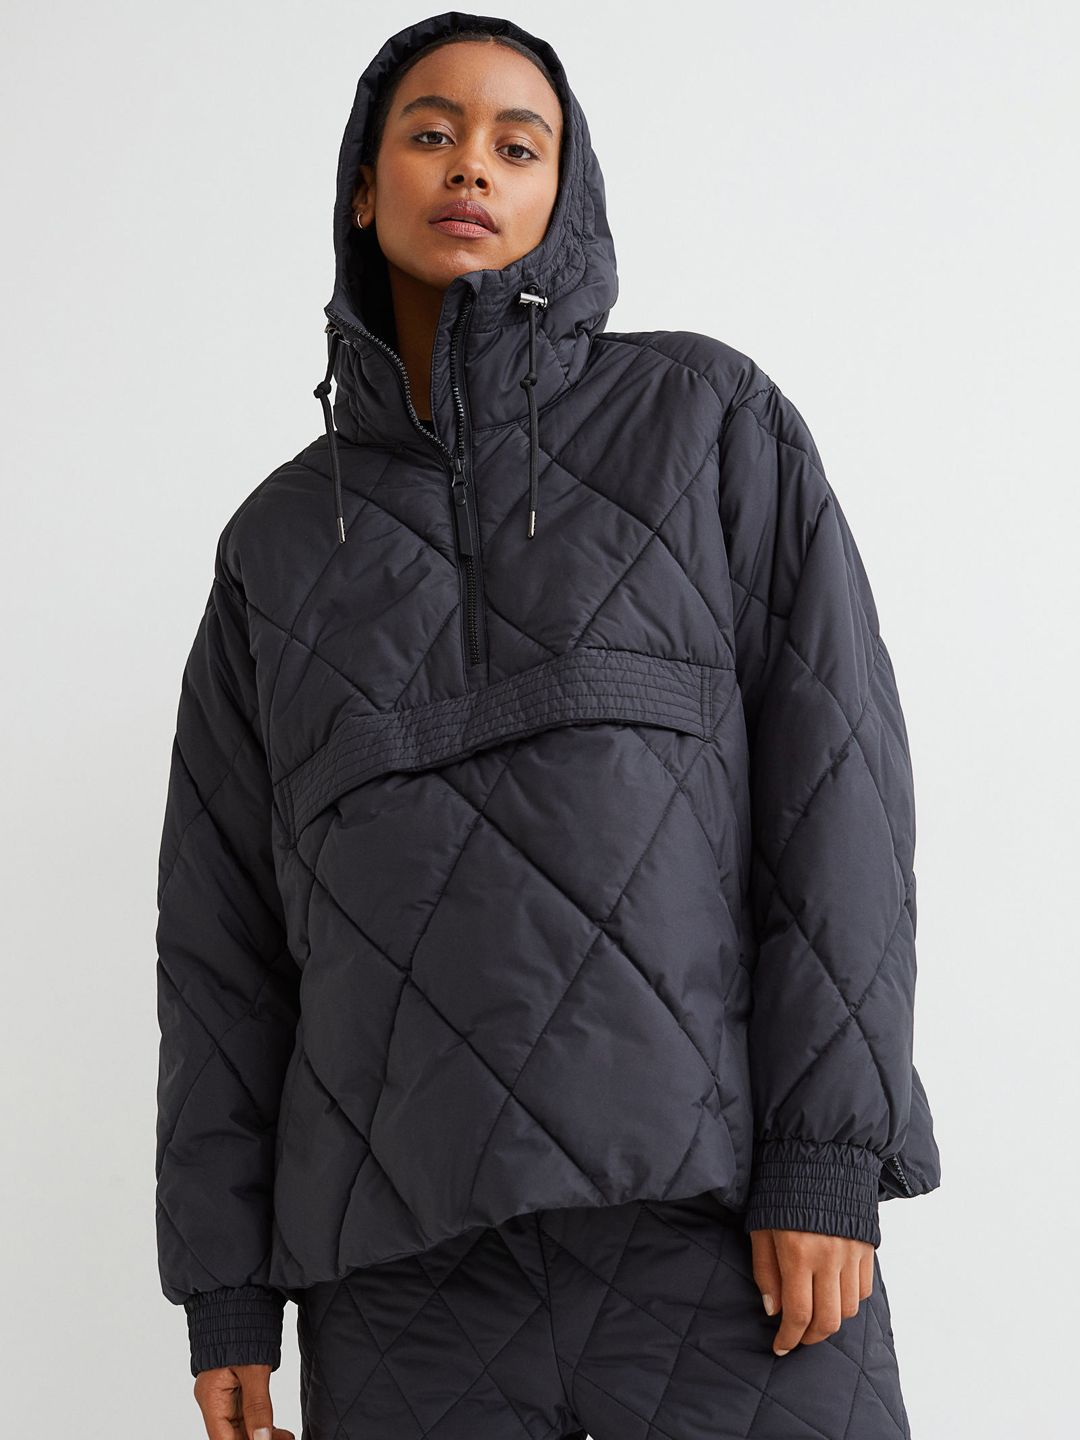 H&M Women Black THERMOLITE Popover Puffer Sports Jacket Price in India